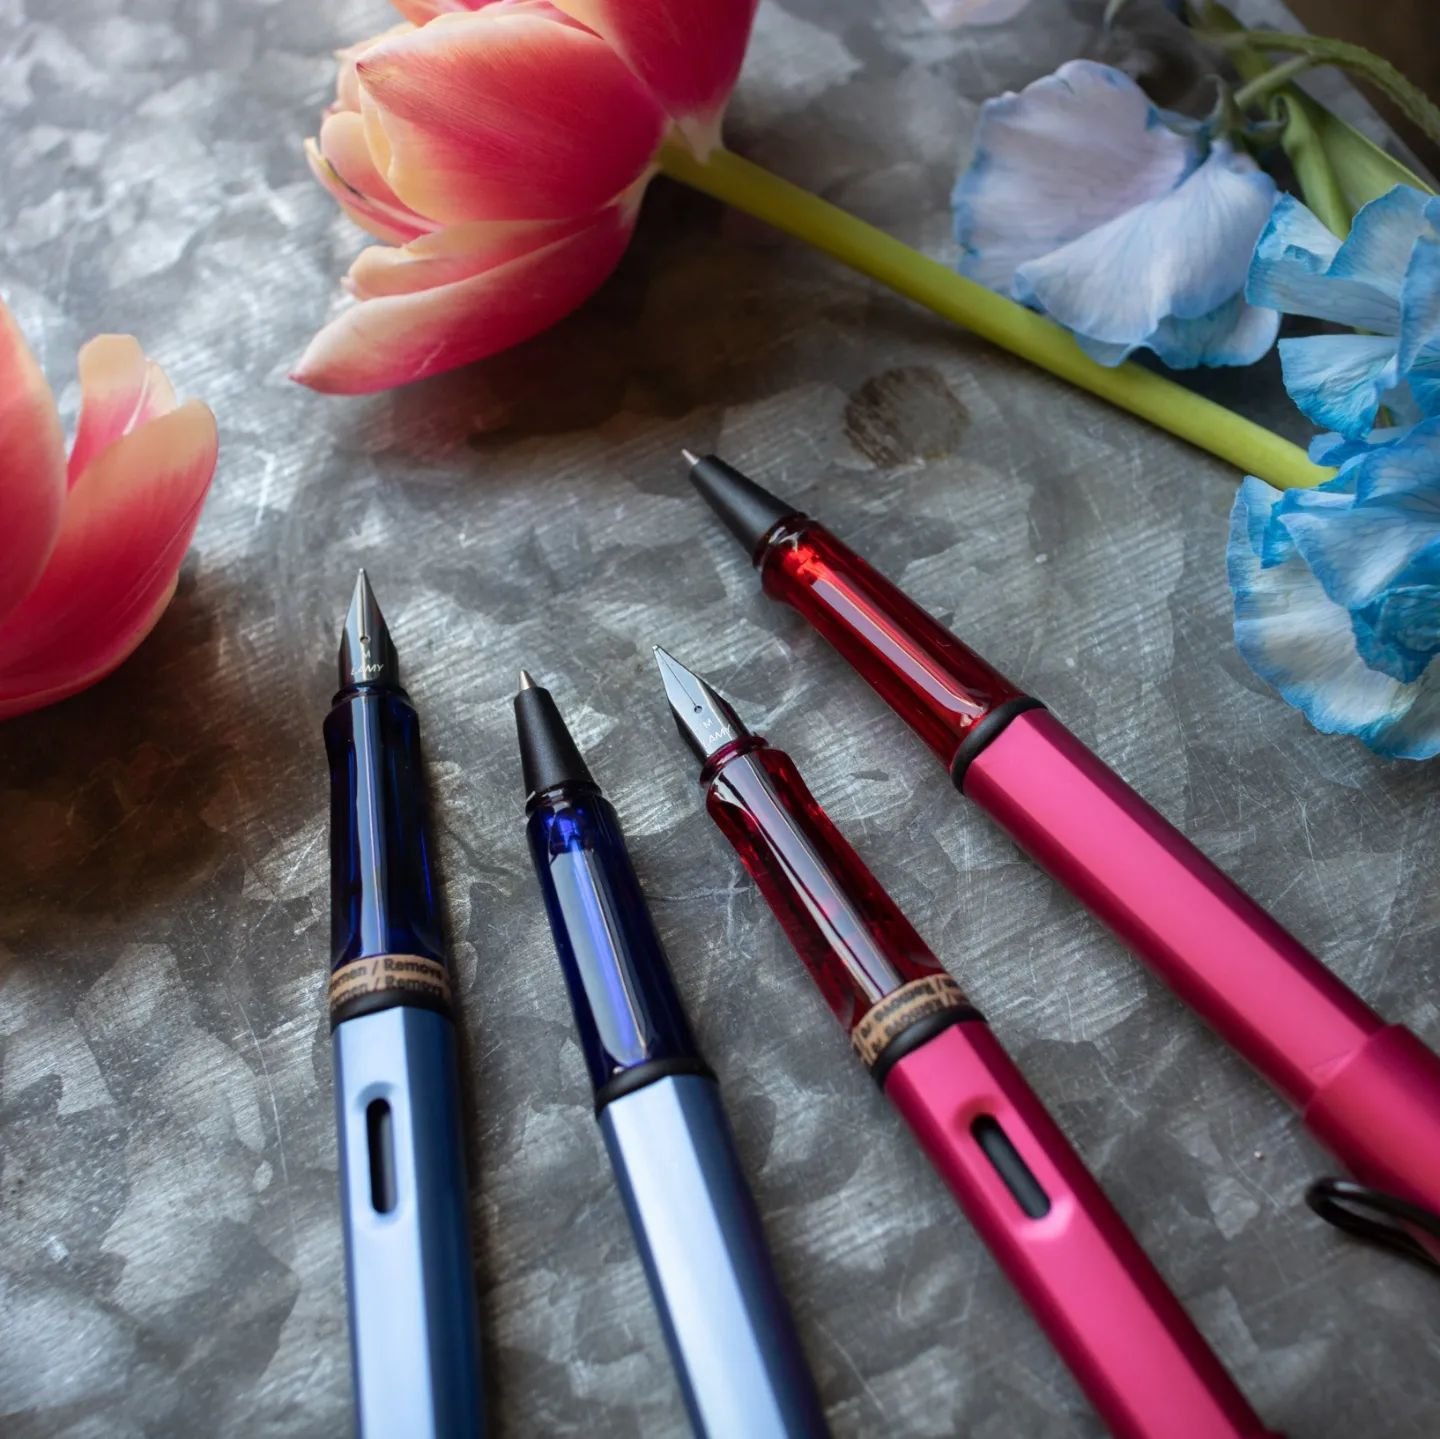 The spring fountain pen releases are flowing in! Visit our store to see the newest offerings and test out these beautiful pens in person.
🌿 @lamy_global Al-Star Firey and Aquatic are here, in fountain pen and rollerball styles.
🌿 @twsbi Eco Caff&ea